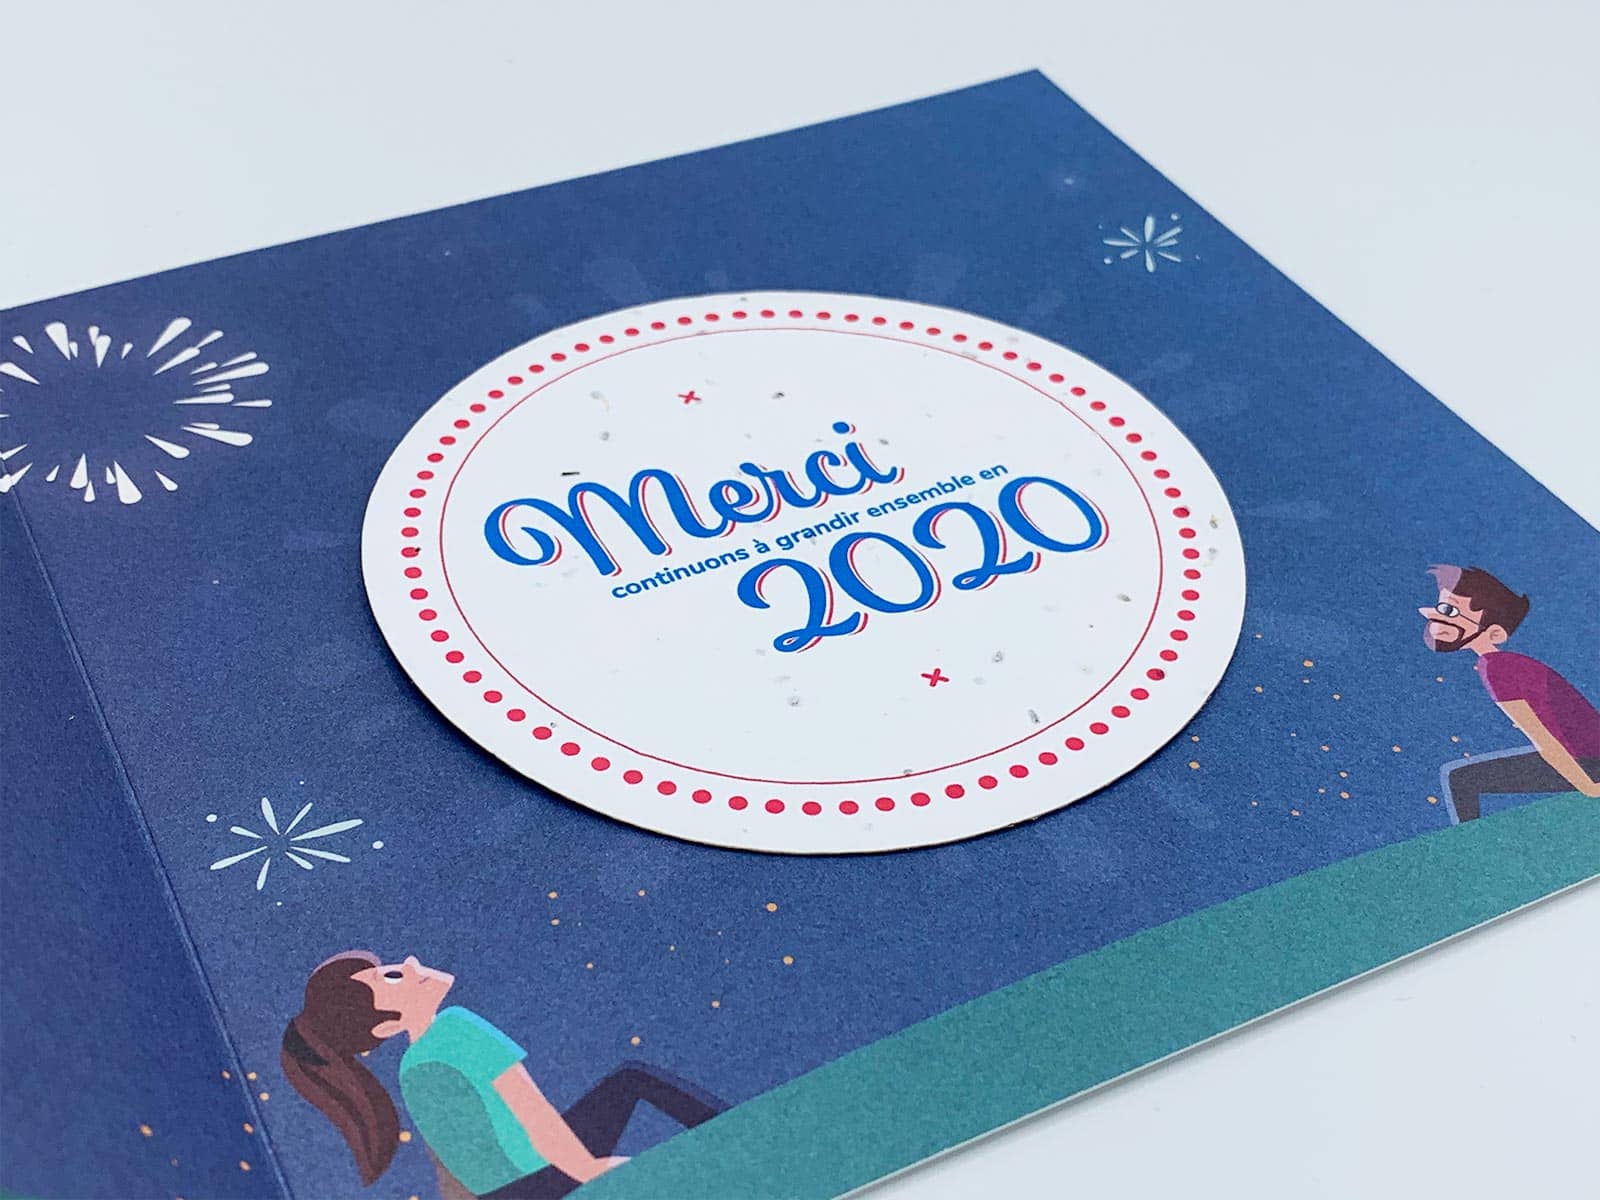 Kamoo Studio® - Print - Carte Voeux Greetings 2020 - INAP Luxembourg - Image 3